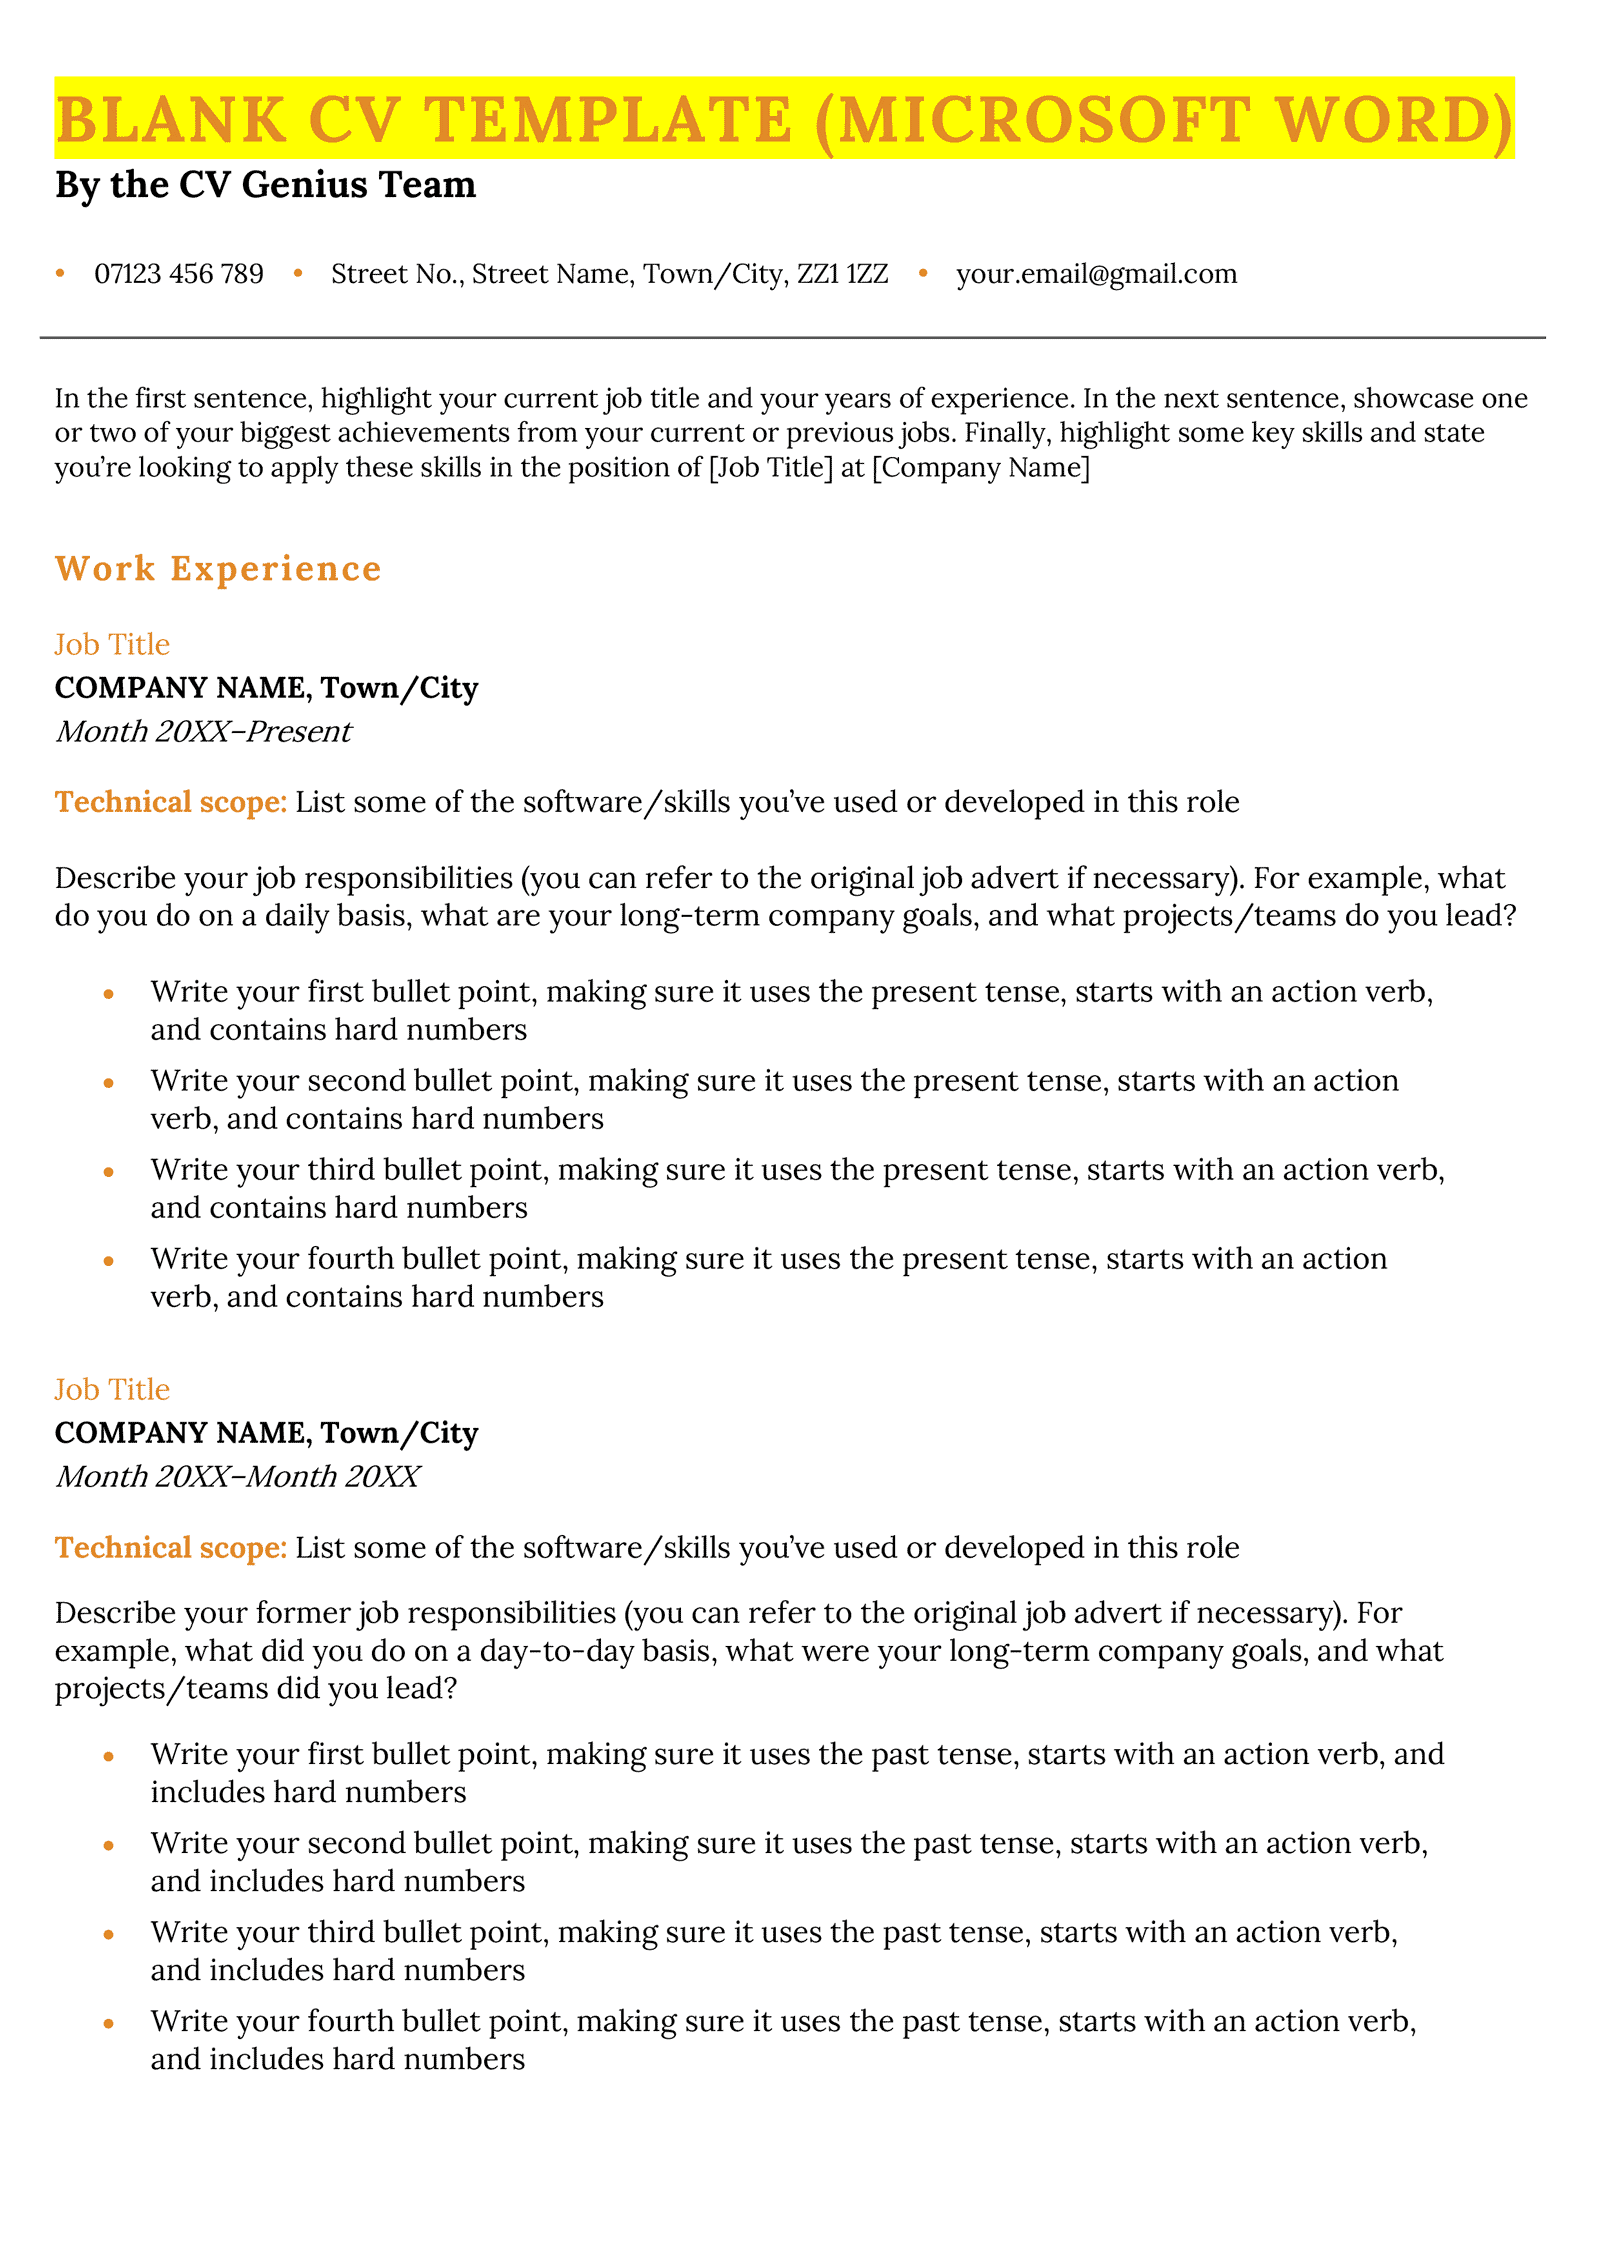 A blank CV template for Word that you can download and fill in with your own information.